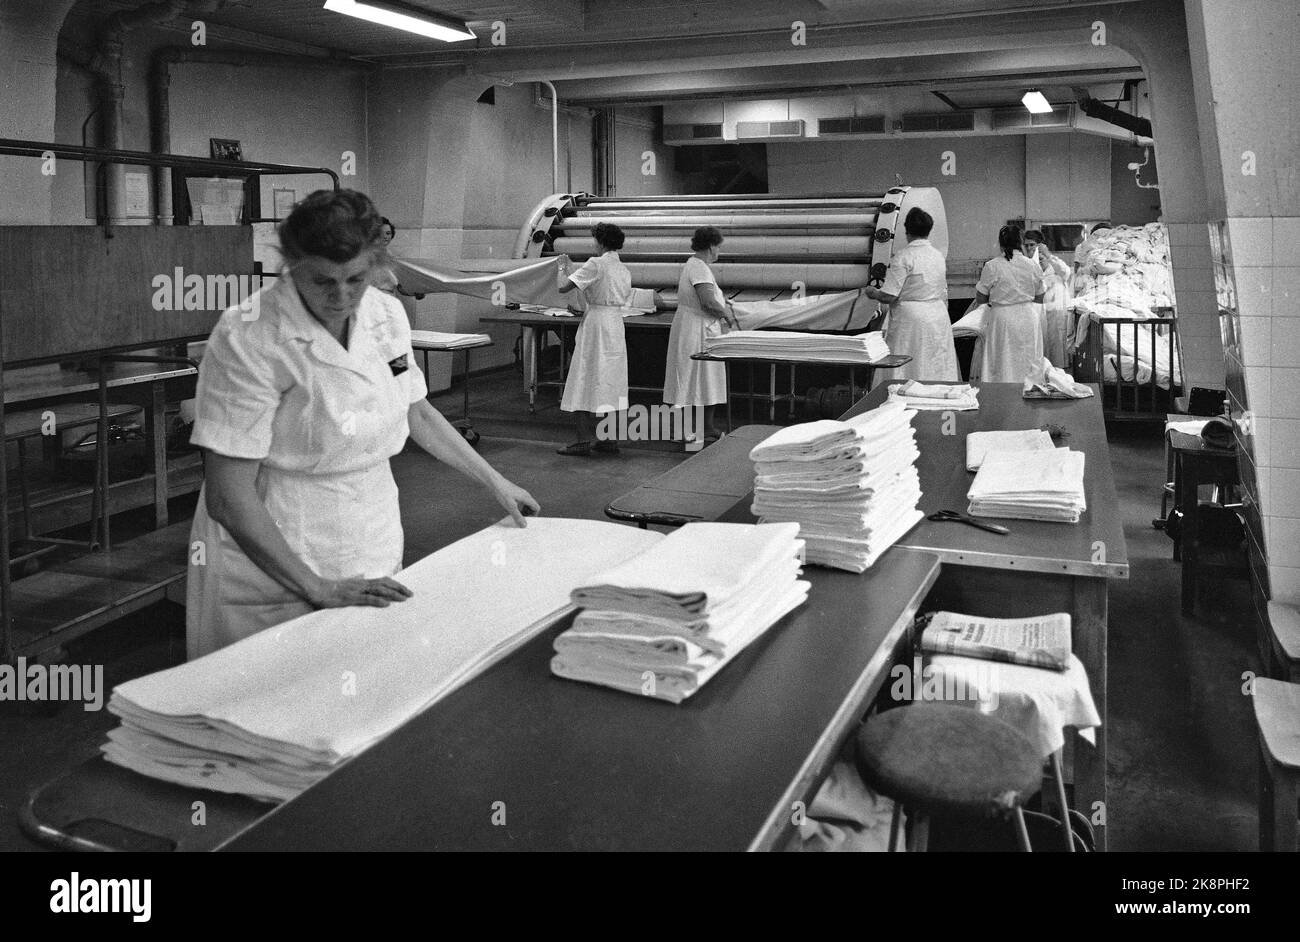 Oslo 19600106. In 1960, NSB had 3212 beds in their sleeping wagons, and they became increasingly popular. Every day, an army of cleaners moved into NSB's area in Lodalen, to wash, clear and change bedding. The laundry is brought here to NSB's laundry in Lodalen, which washes about 3,000,000 bed shifts a year, or nearly 1.5 million kilos of clothes, only from the sleeping cars. Around Christmas there are often 3000 sheets per day! Photo: Ivar Aaserud / Current / NTB Stock Photo